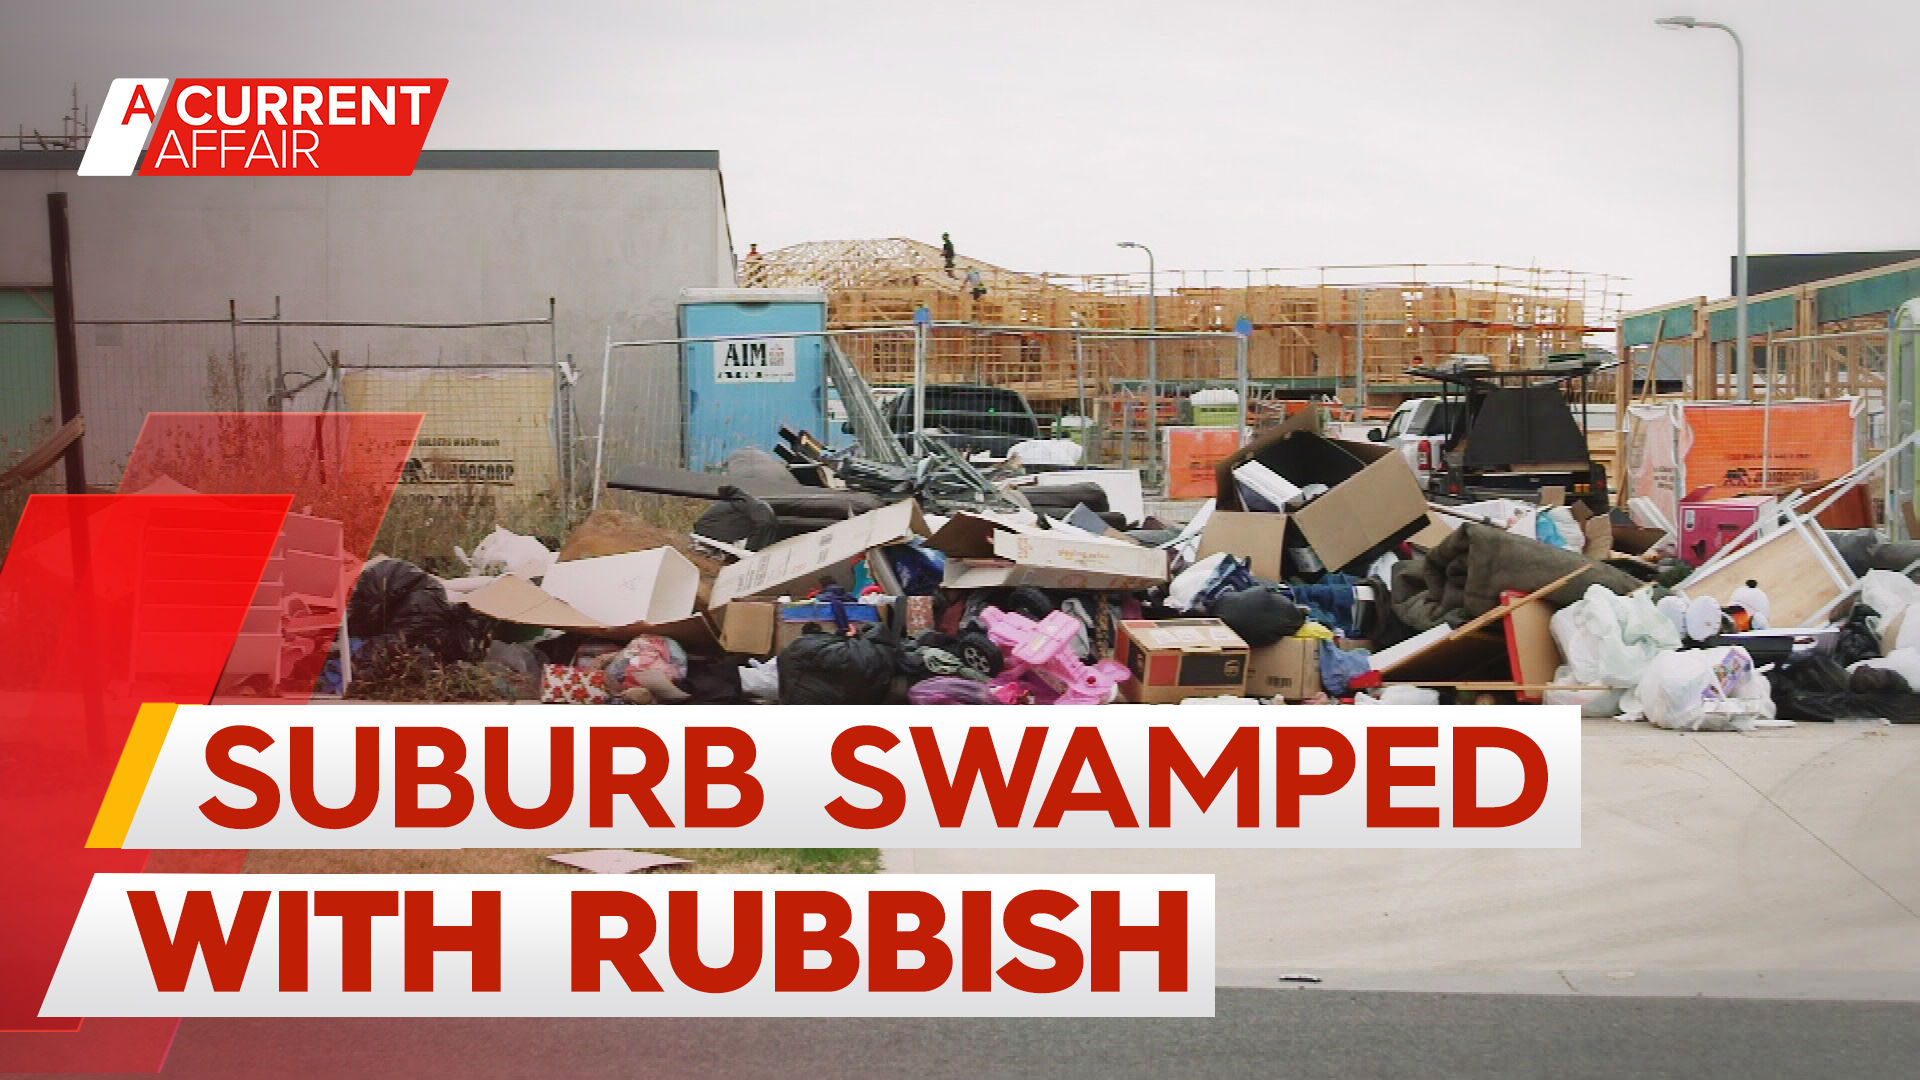 The Melbourne suburb facing an illegal dumping epidemic